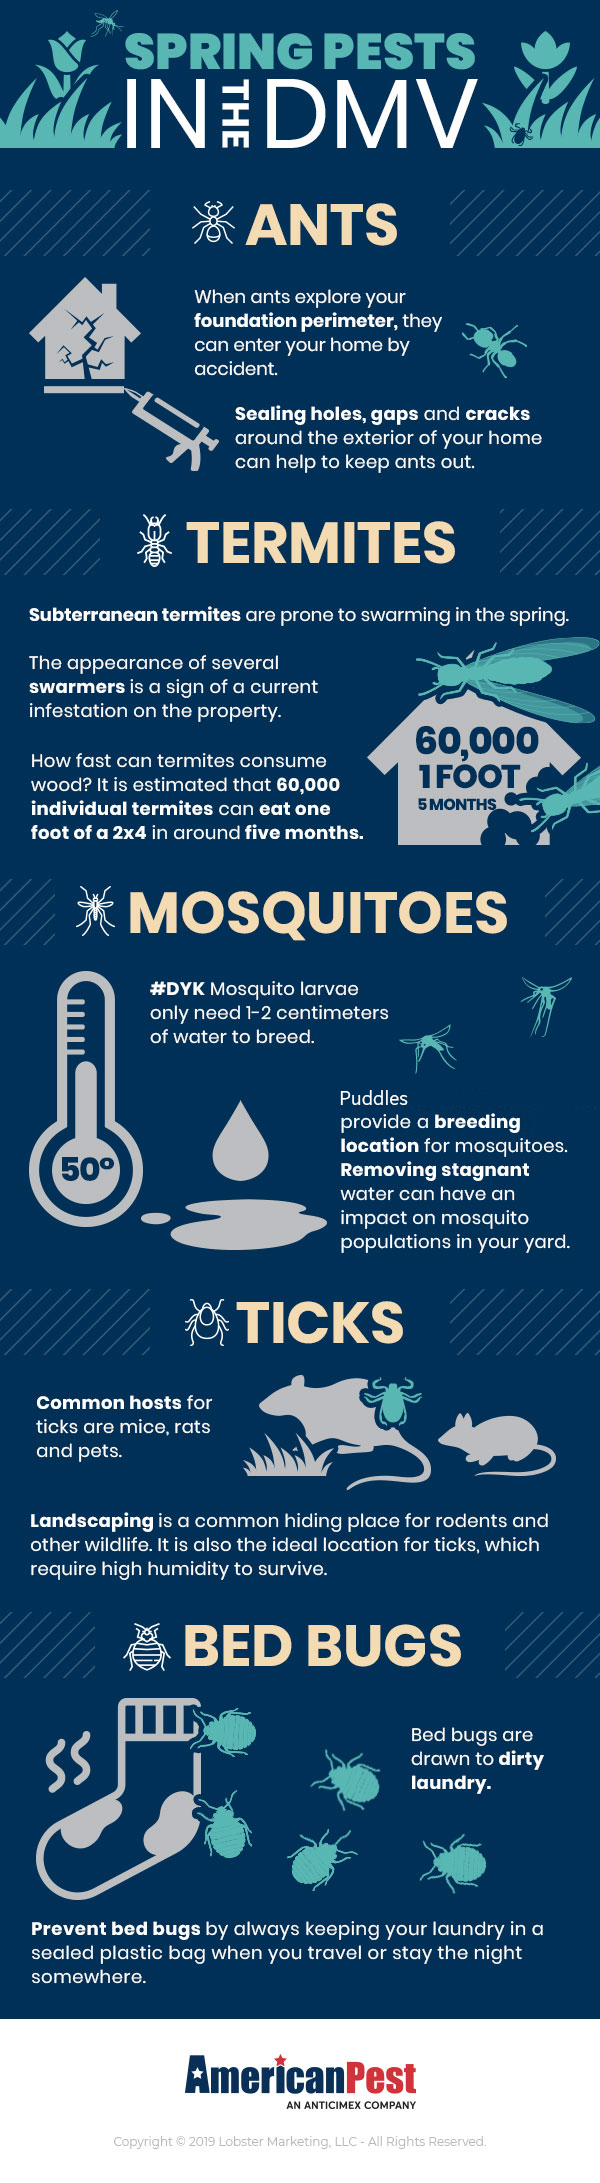 Spring Pests In The DMV Infographic about ants termites mosquitoes ticks and bed bugs 